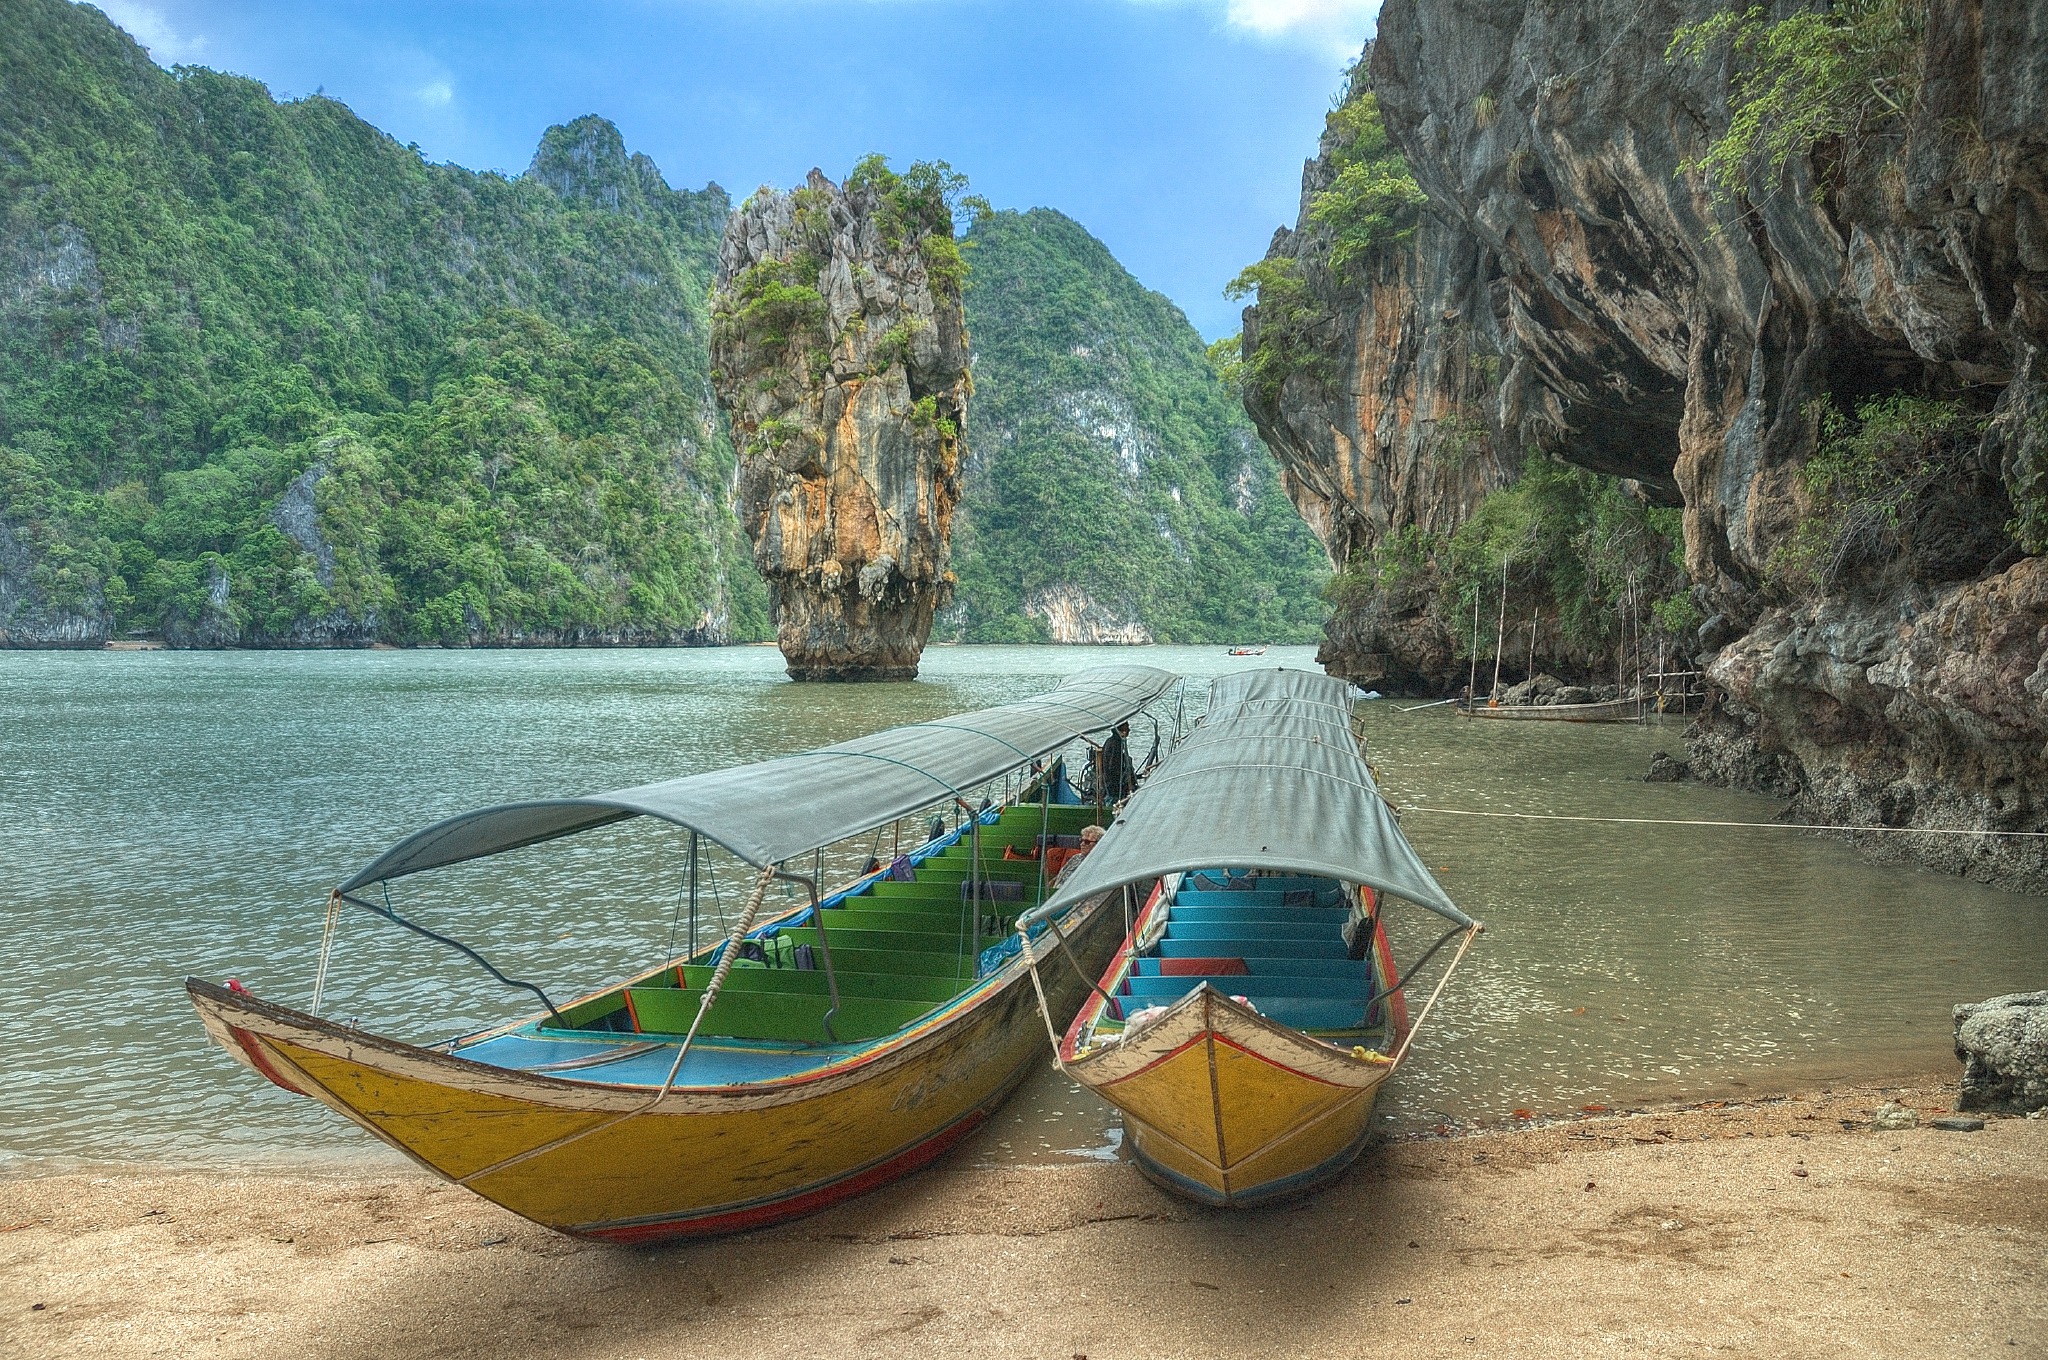 Canoeing off the coast in Thailand.